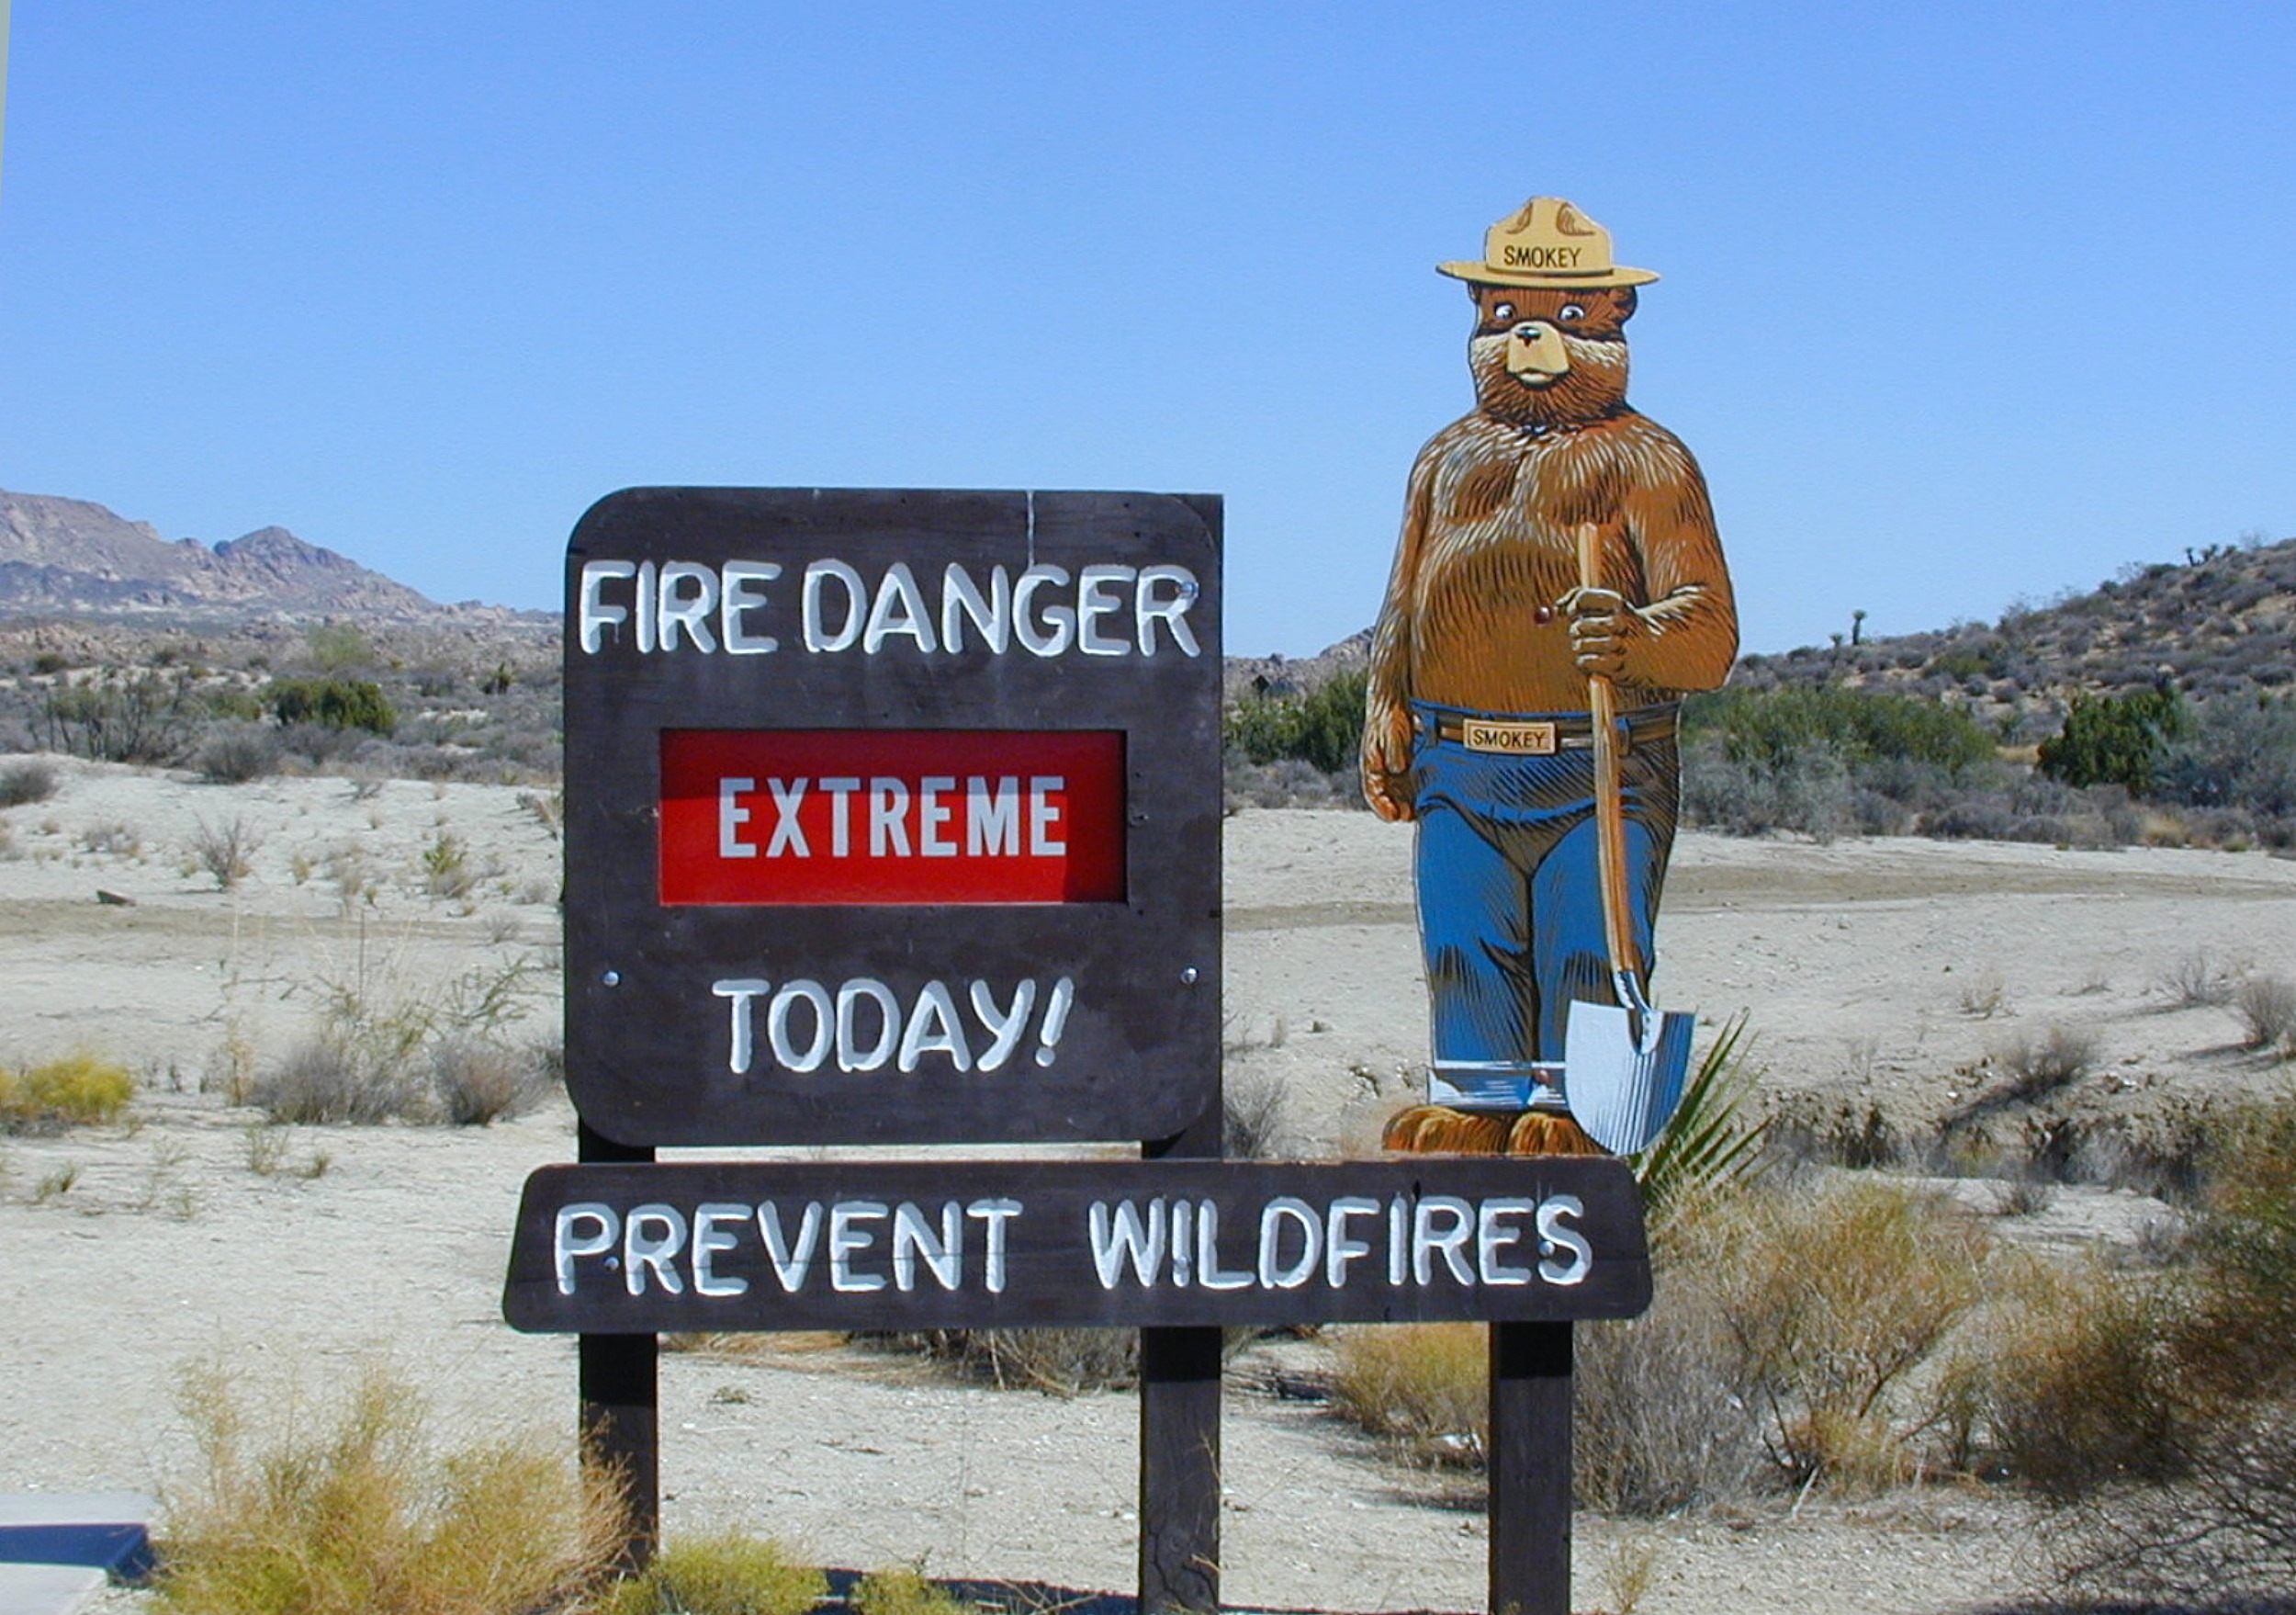 Smokey bear says - Fire warning, prevent wildfires by FraukeFeind